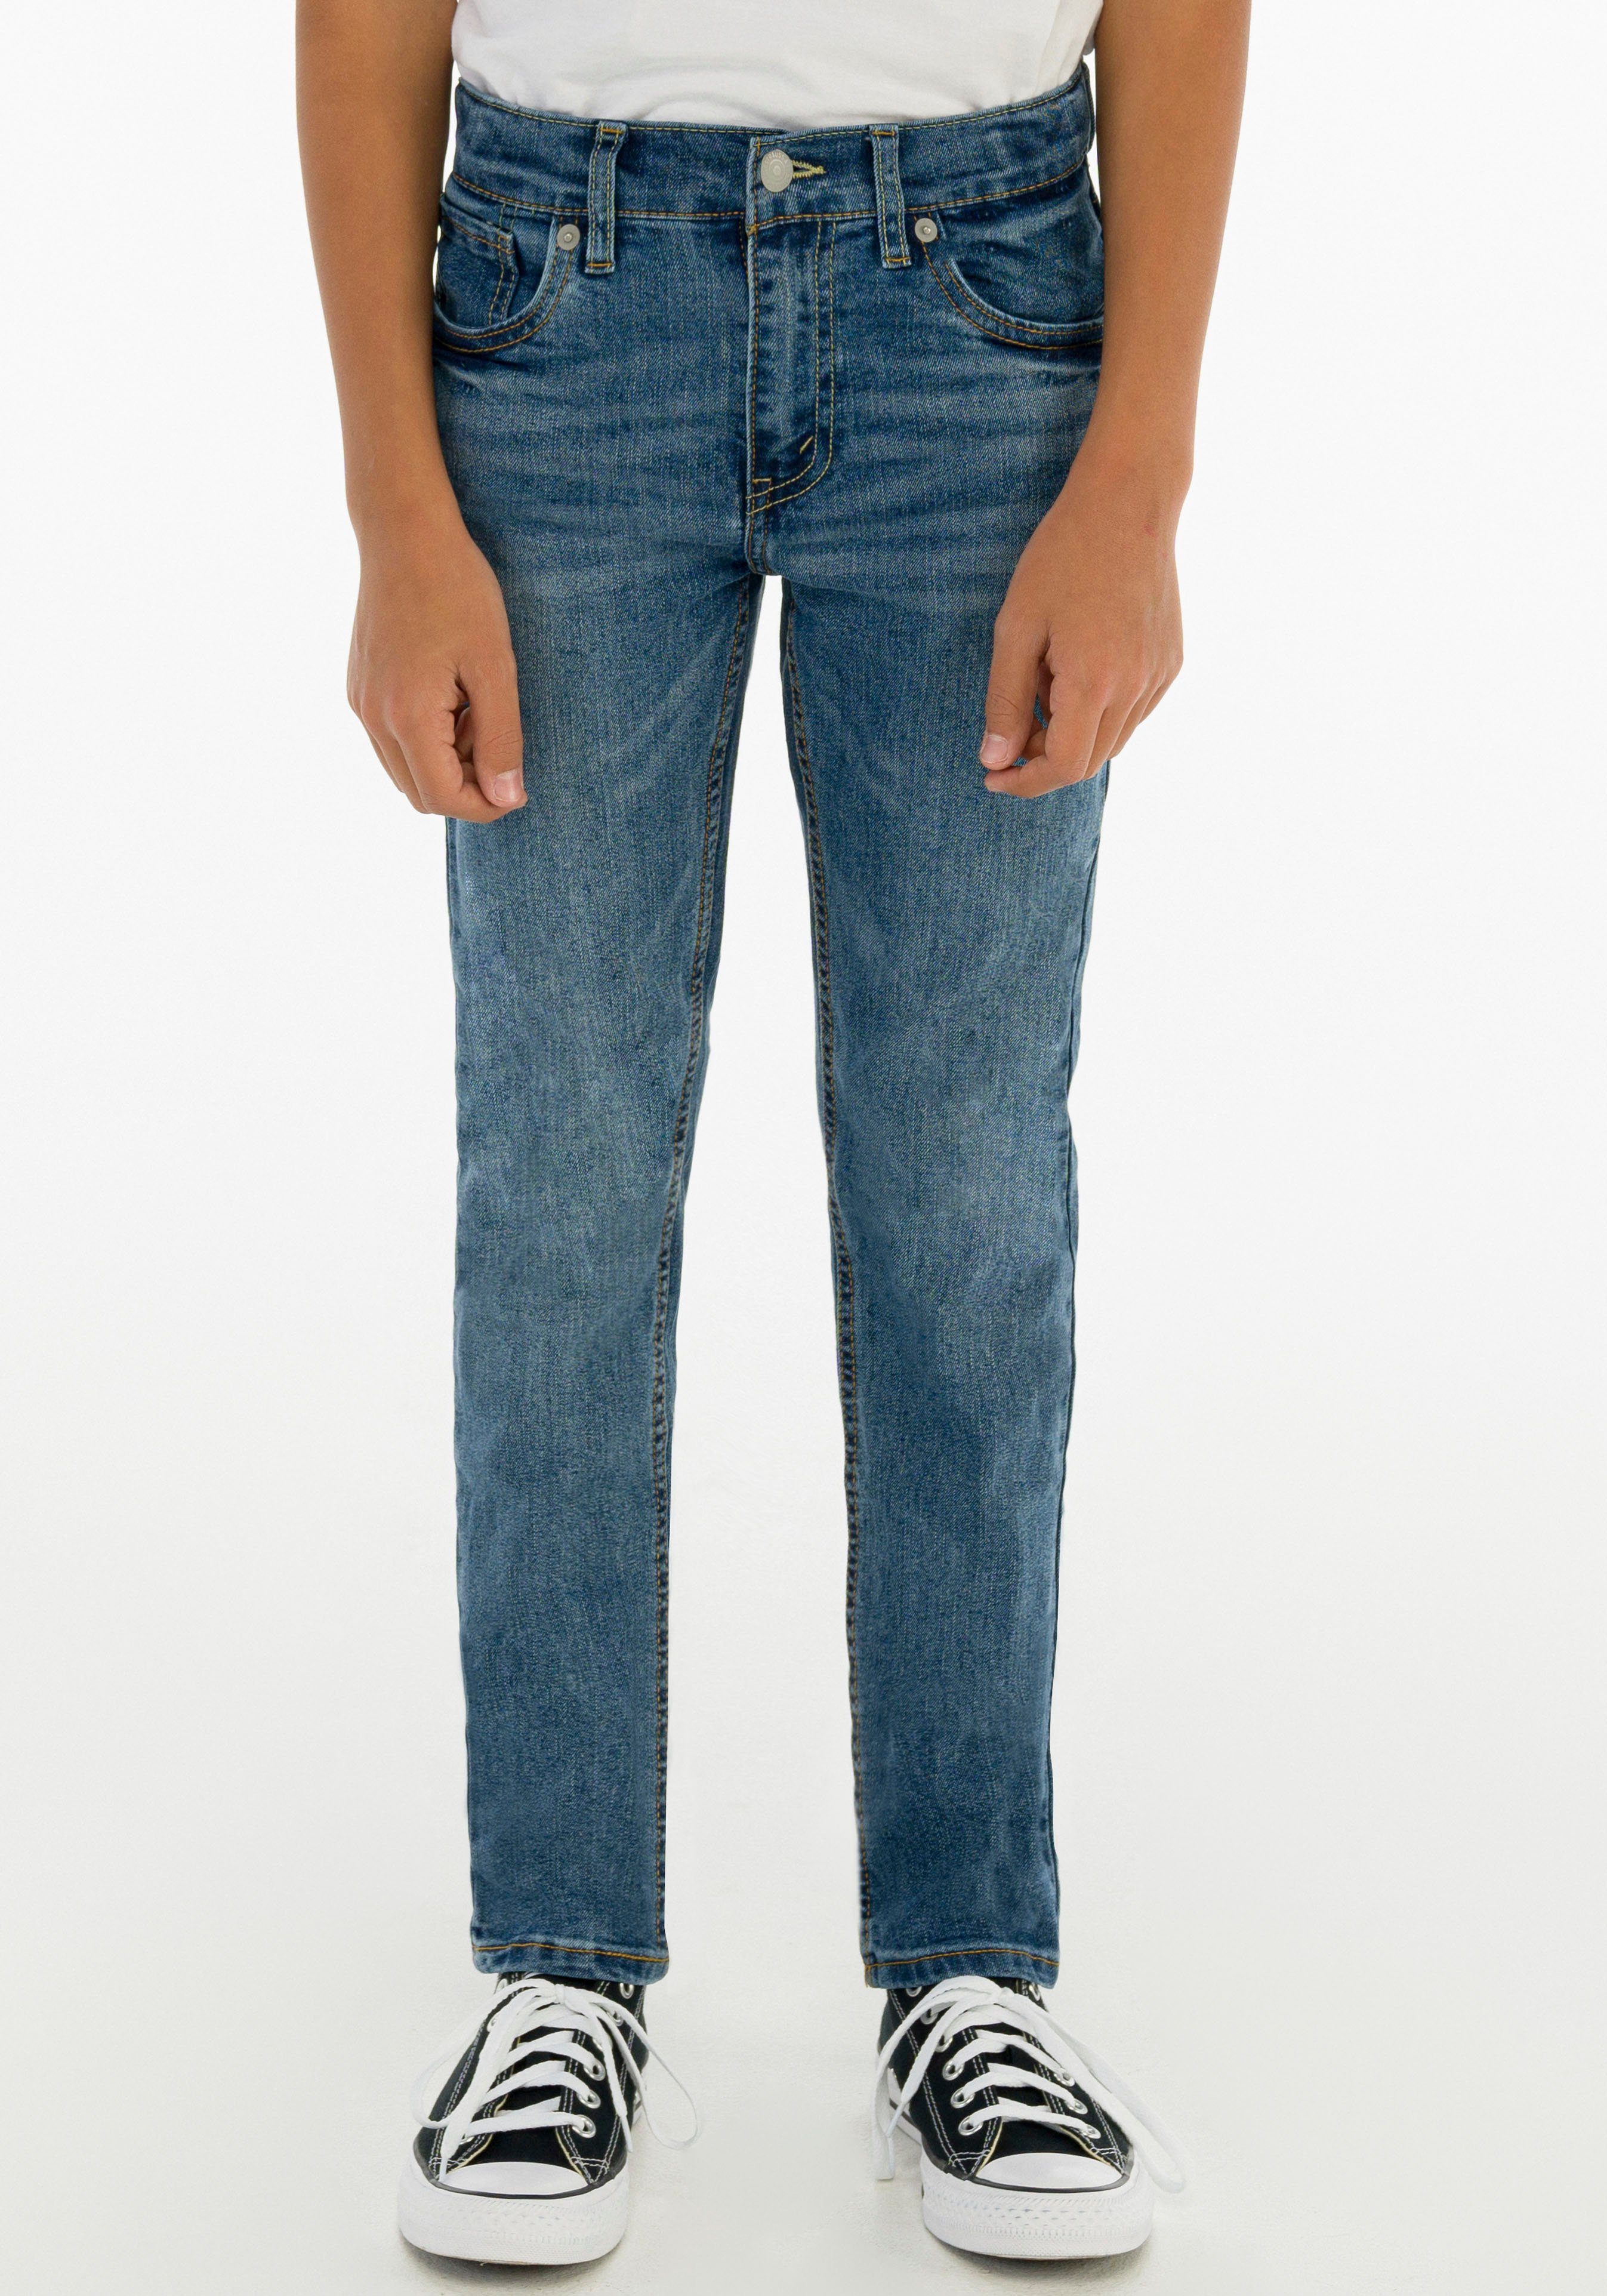 for Skinny-fit-Jeans JEANS Levi's® 510 used denim SKINNY bue Kids BOYS mid FIT